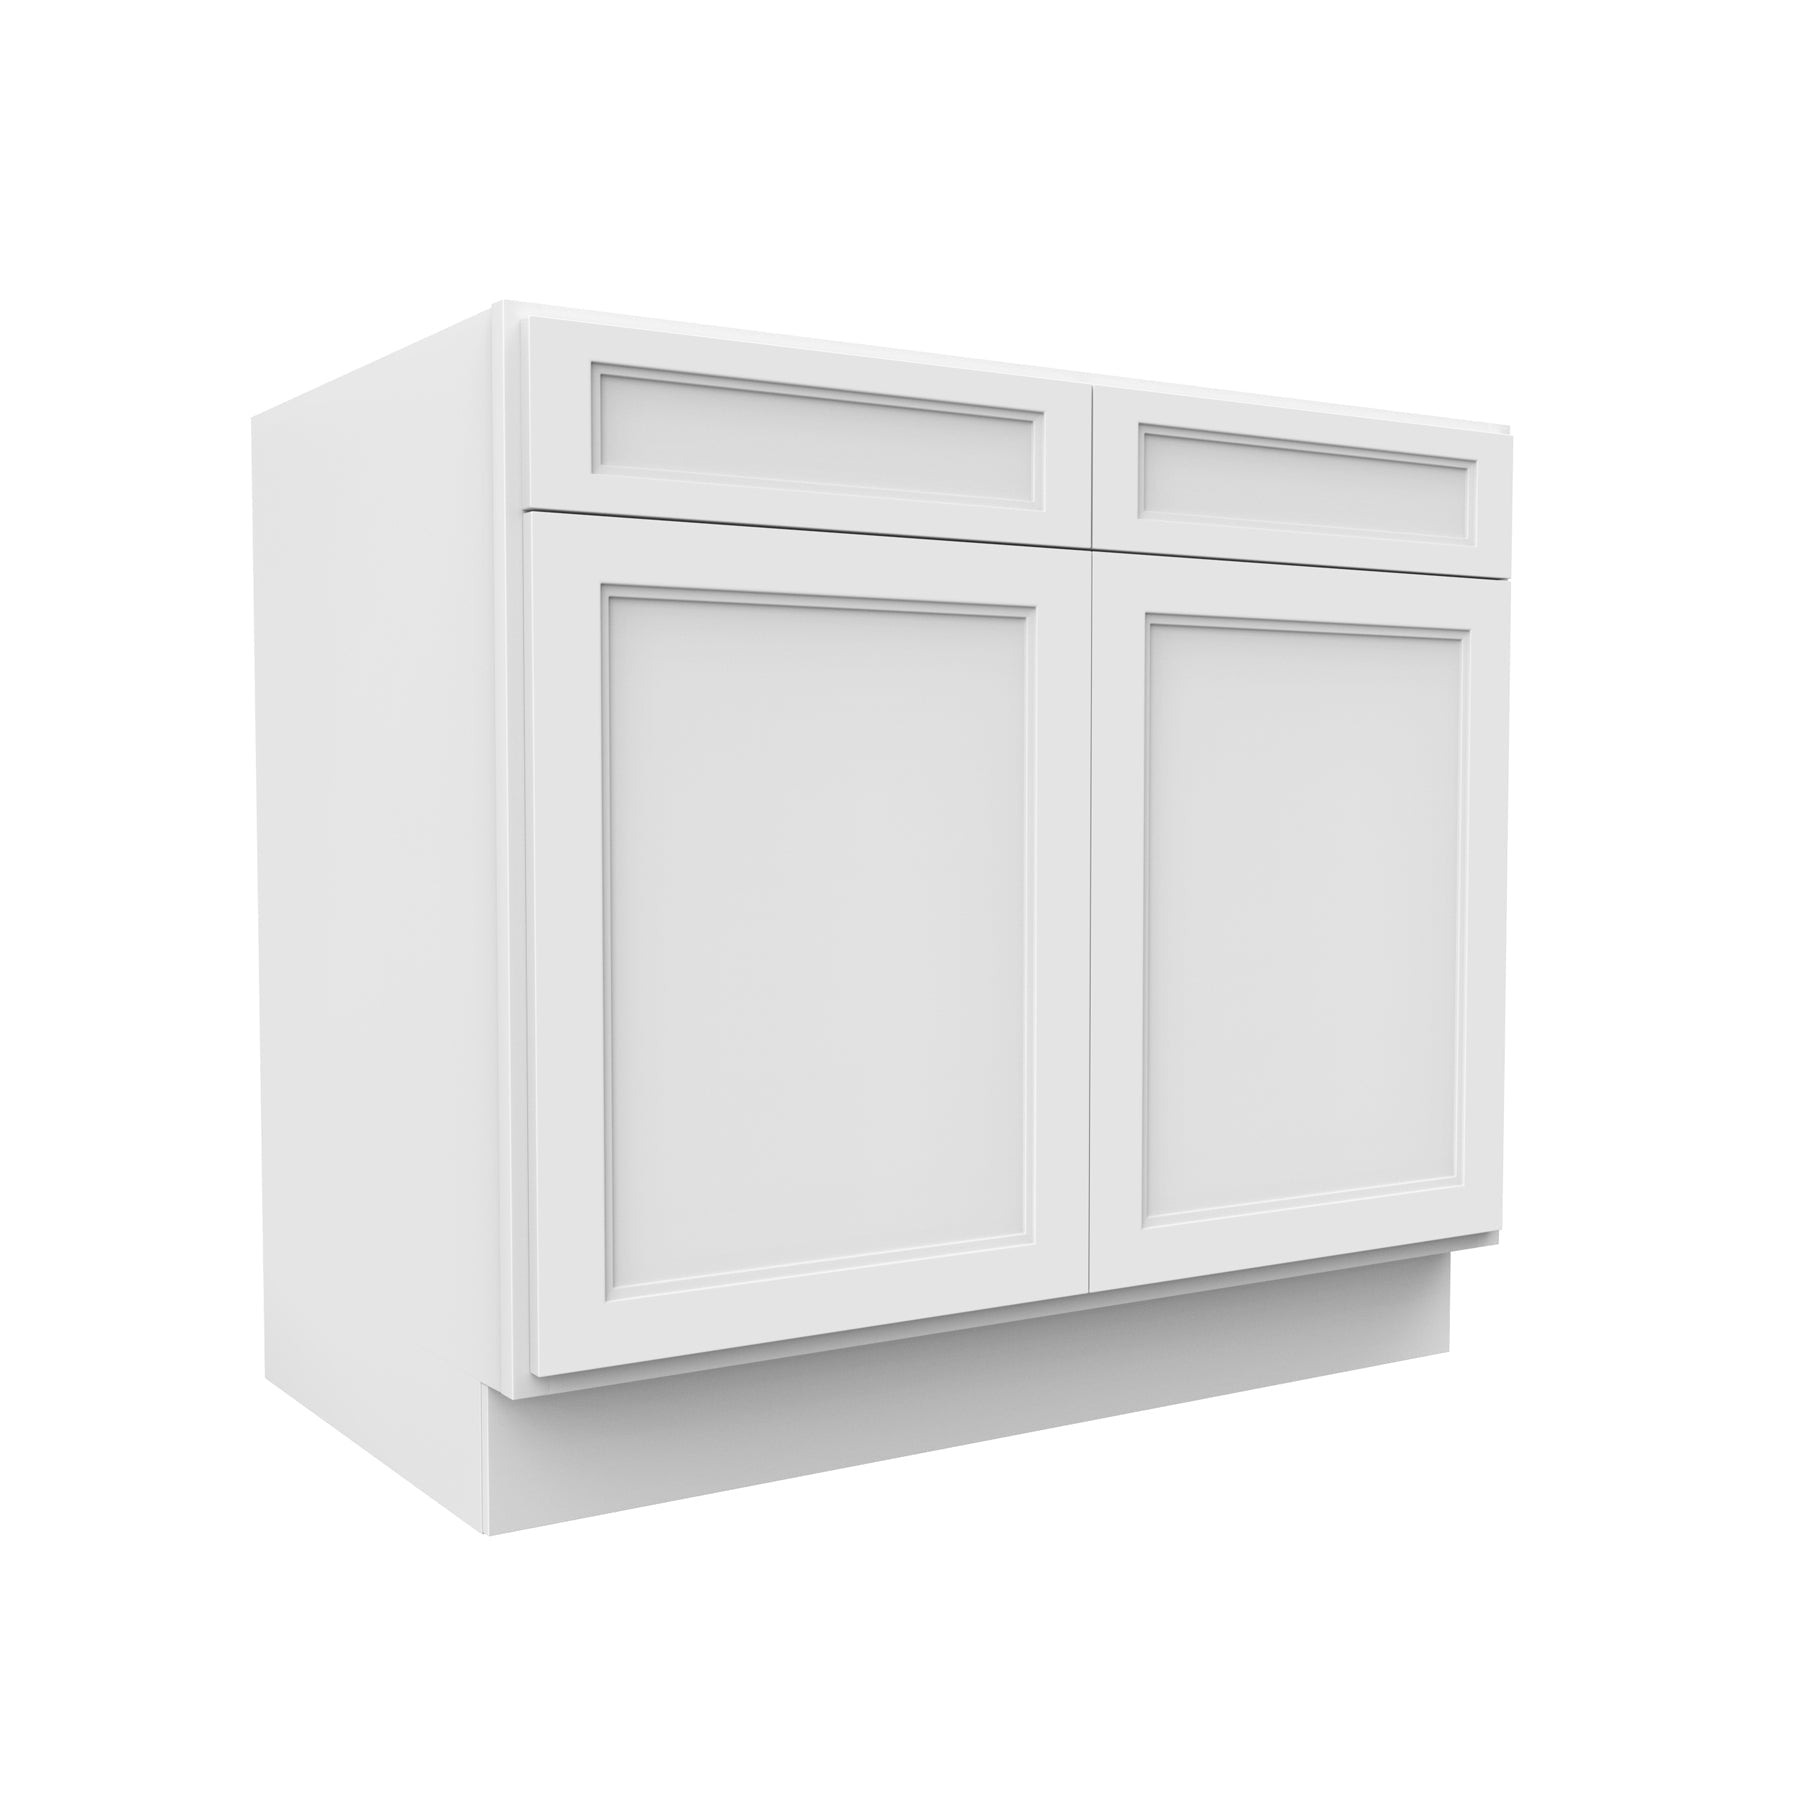 RTA - Fashion White - Double Drawer Front 2 Door Sink Base Cabinet | 39"W x 34.5"H x 24"D